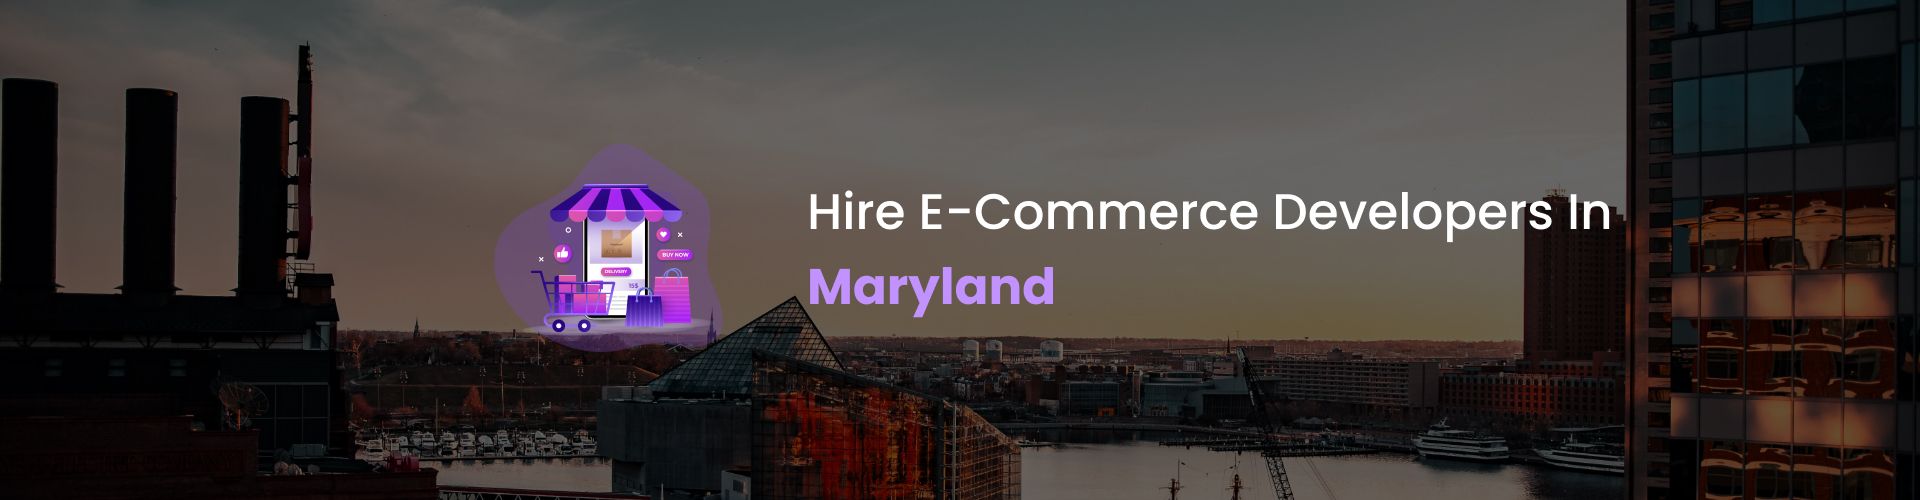 hire ecommerce developers in maryland